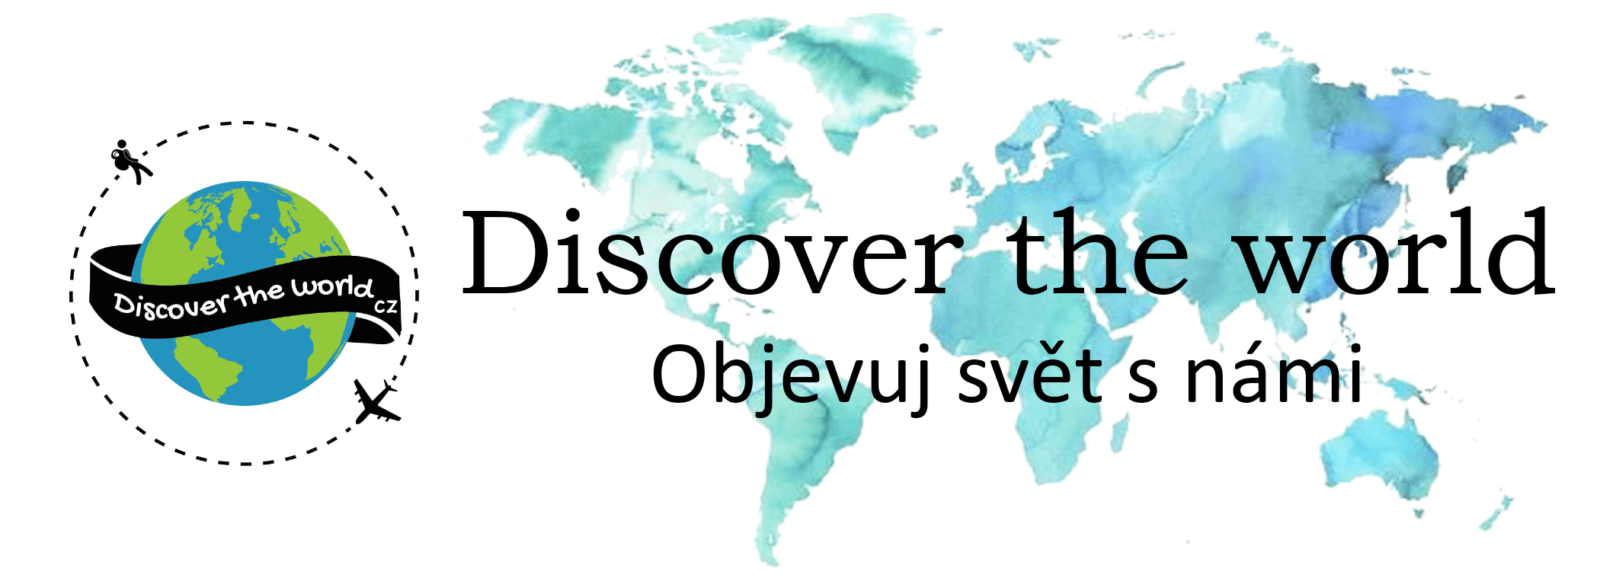 Discover the world cz